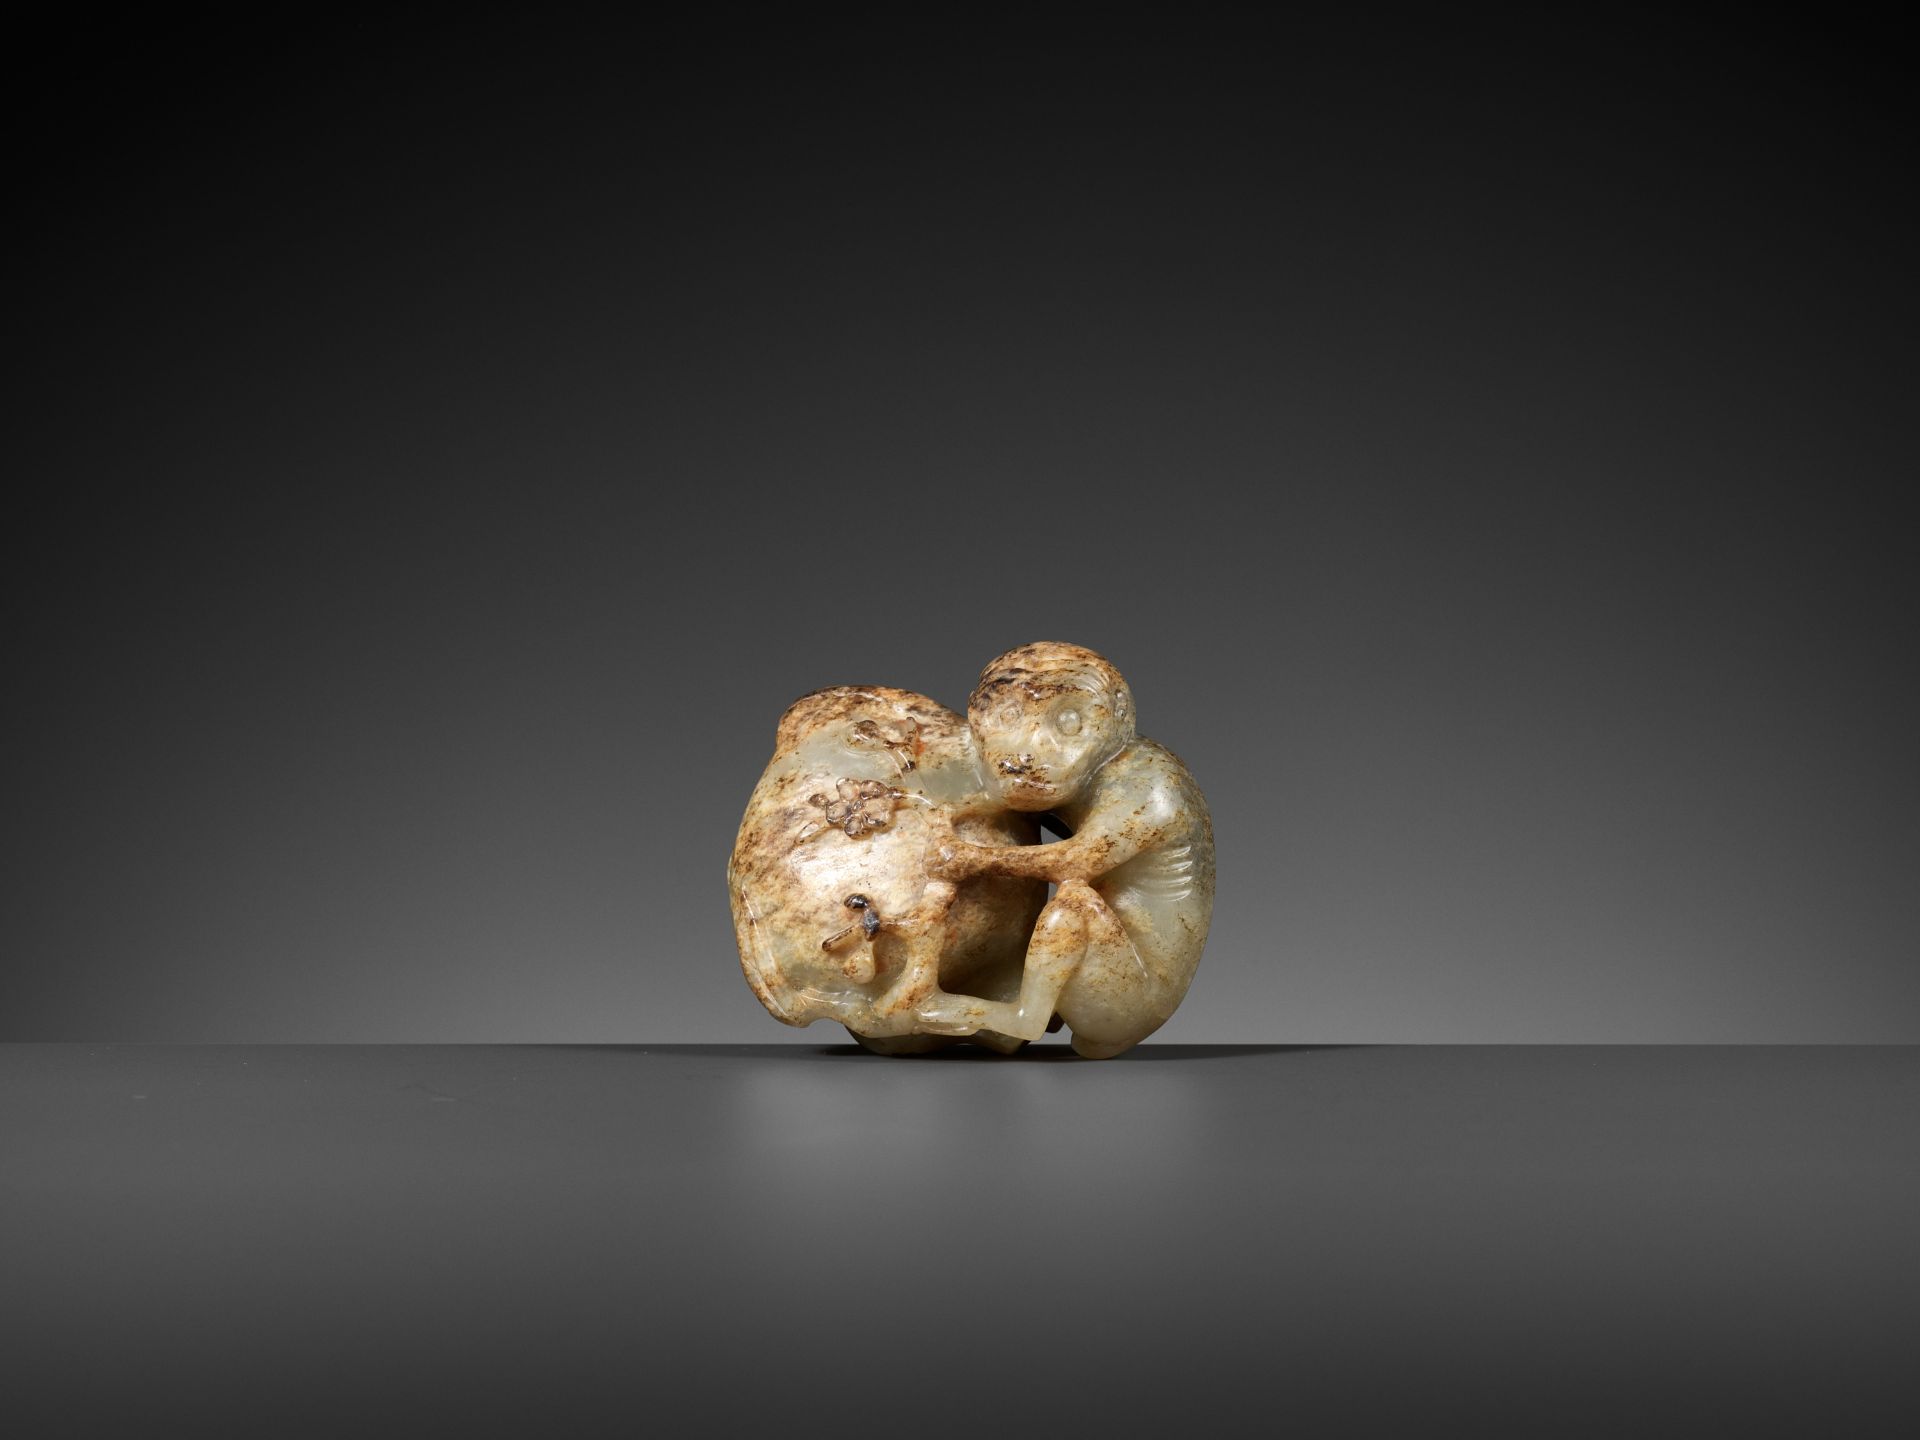 A MOTTLED PALE CELADON JADE 'MONKEY AND PEACH' FIGURE, 17TH - 18TH CENTURY - Image 9 of 10